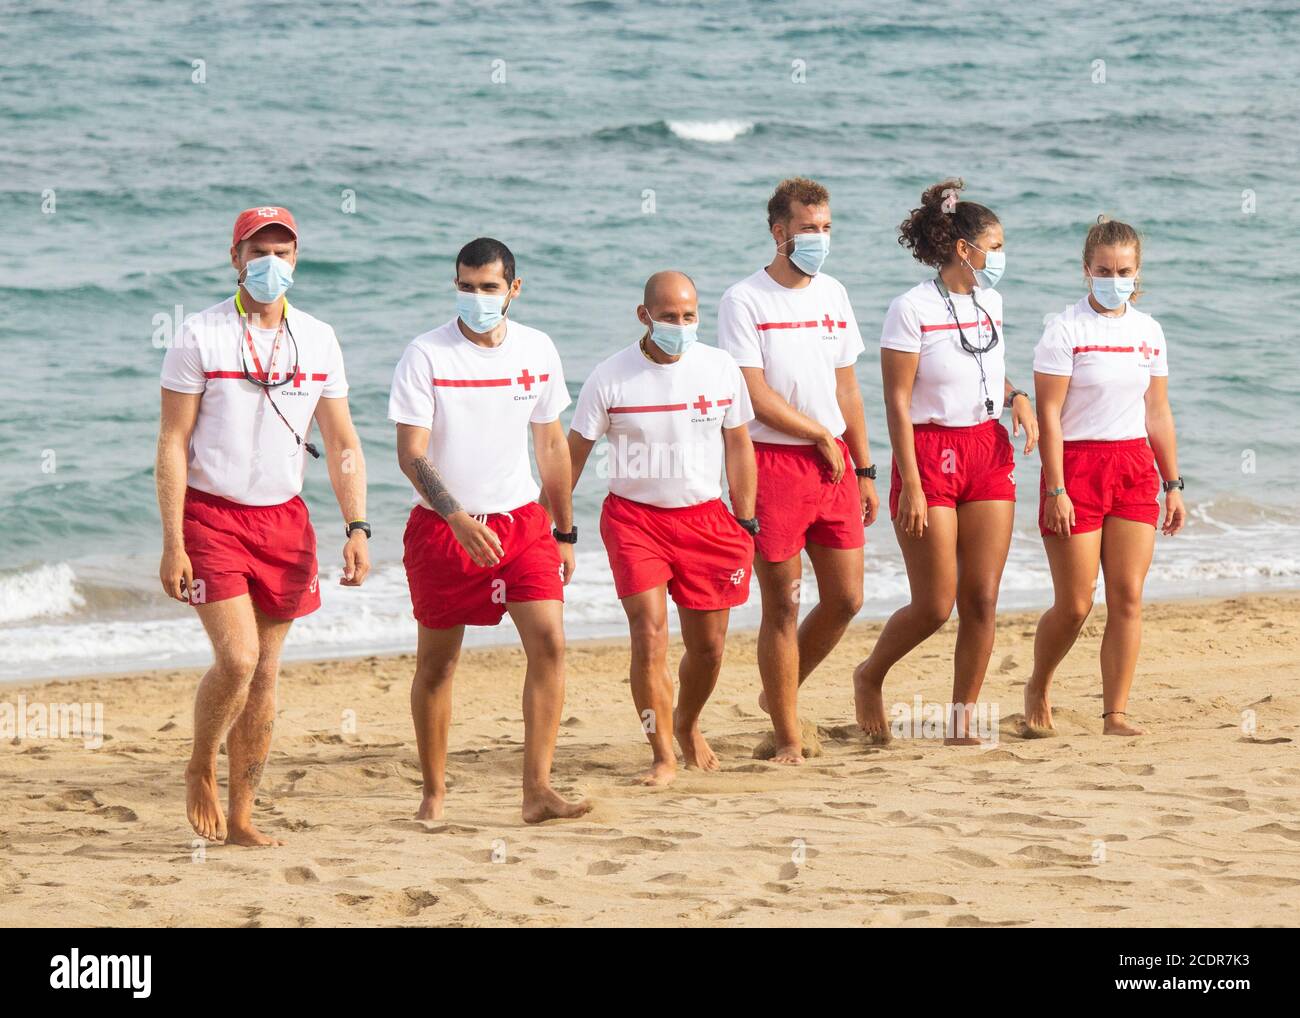 Las Palmas, Gran Canaria, Canary Islands, Spain. 28th August, 2020. Lifeguards wearing face masks on the city beach in Las Palmas on Gran Canaria. The Canary Islands have seen a huge spike in Coronavirus infections in August, with Las Palmas registering the most cases. Credit: Alan Dawson/Alamy Live News Stock Photo